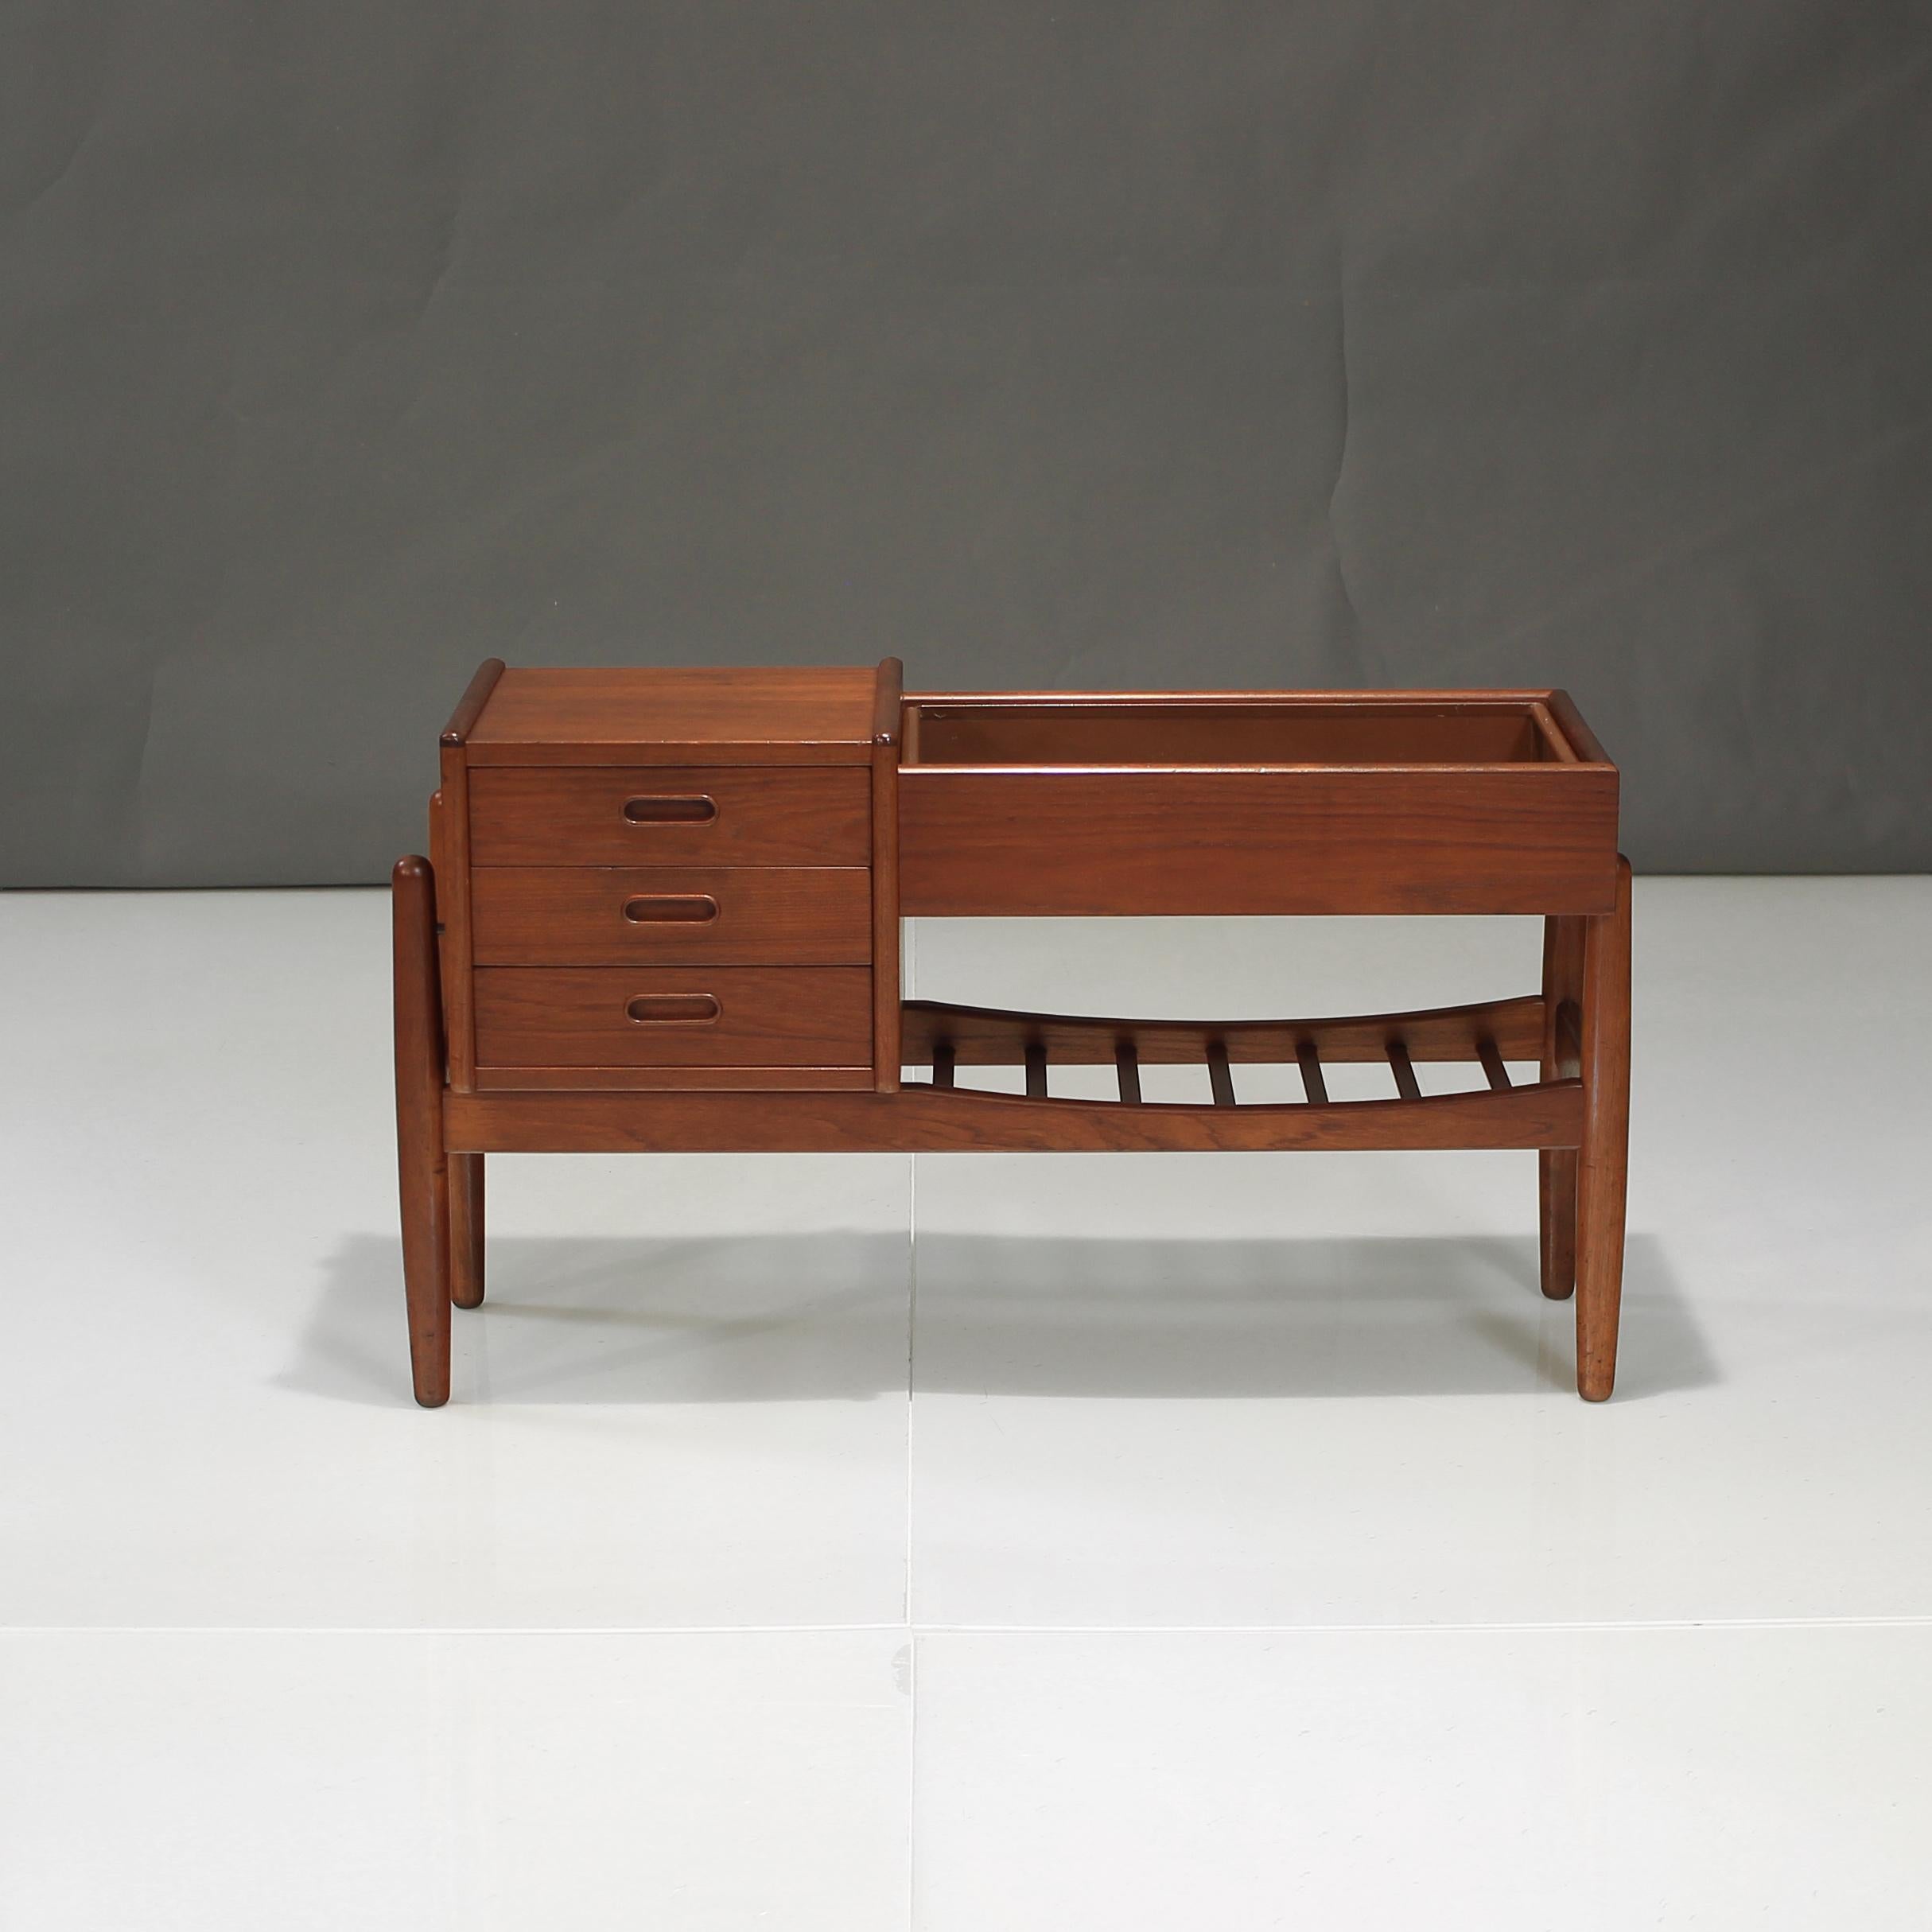 This small planter with chest of drawers designed by Arne Wahl Iversen for Vinde Møbelfabrik offers great versatility and visuals all around.  Wonderful shaping and tapered lines throughout.  3 drawers perfect for accessories and a shelf below